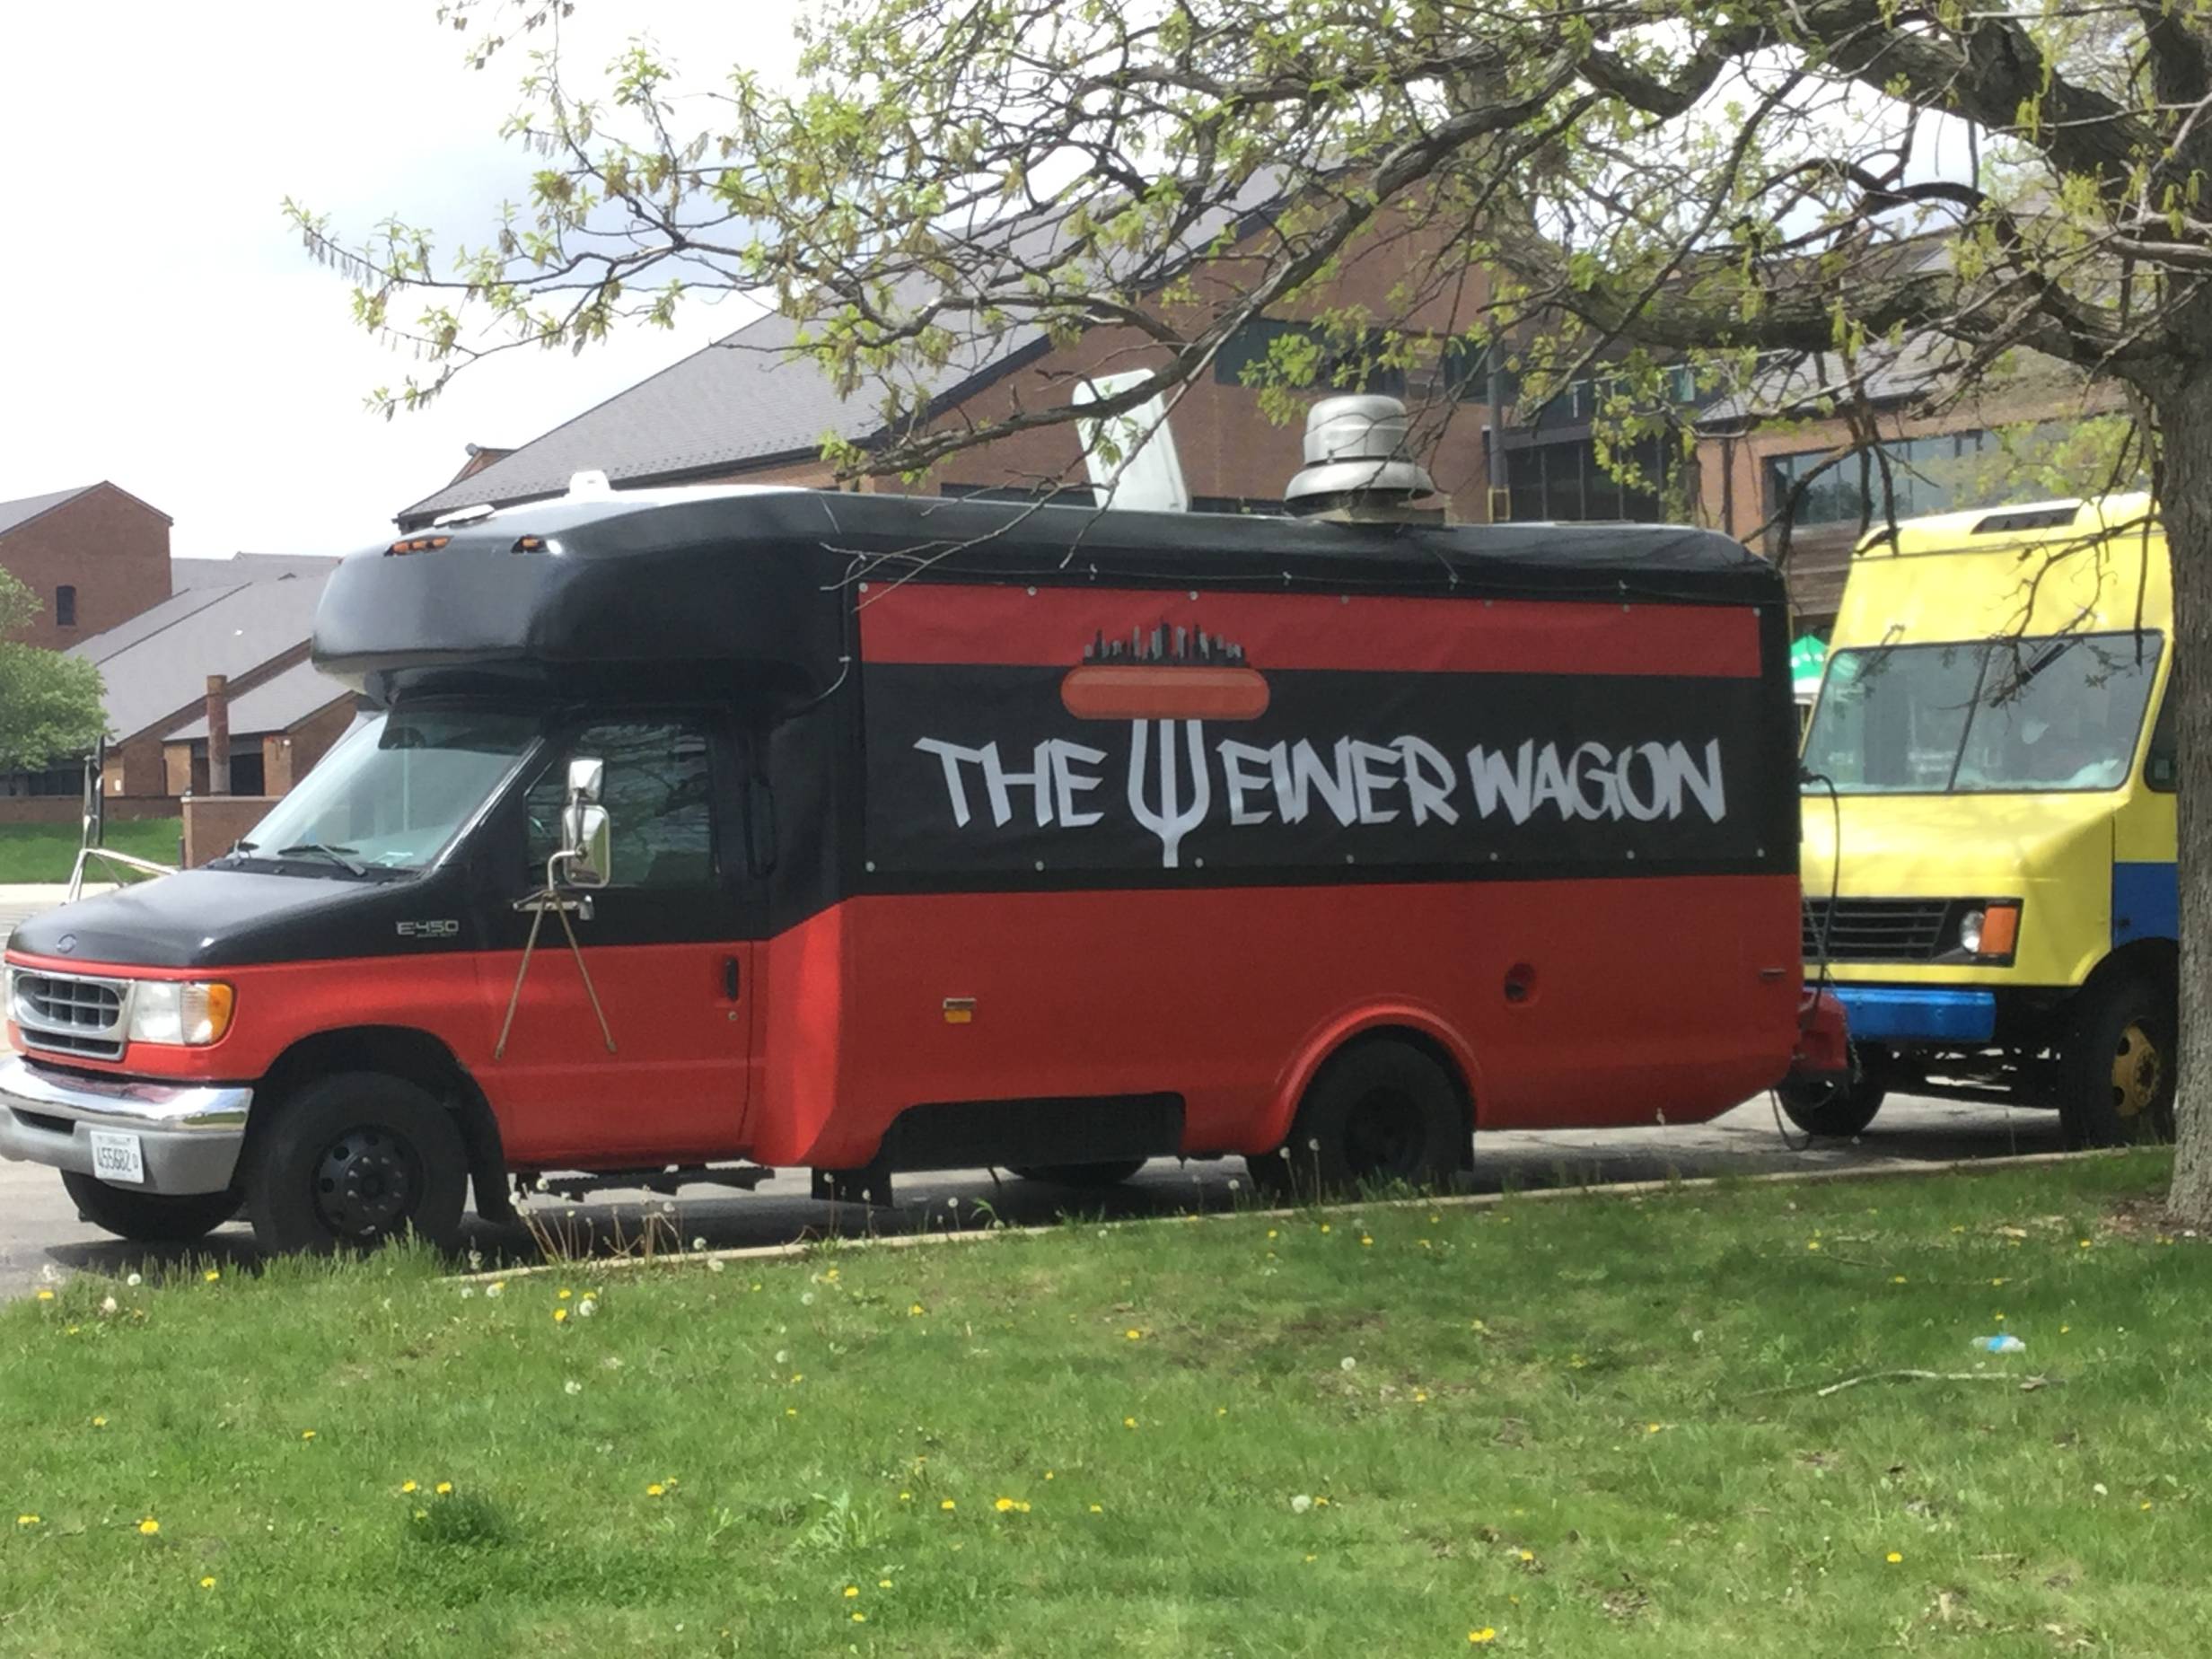 The Weiner Wagon is a welcome addition to the food truck scene